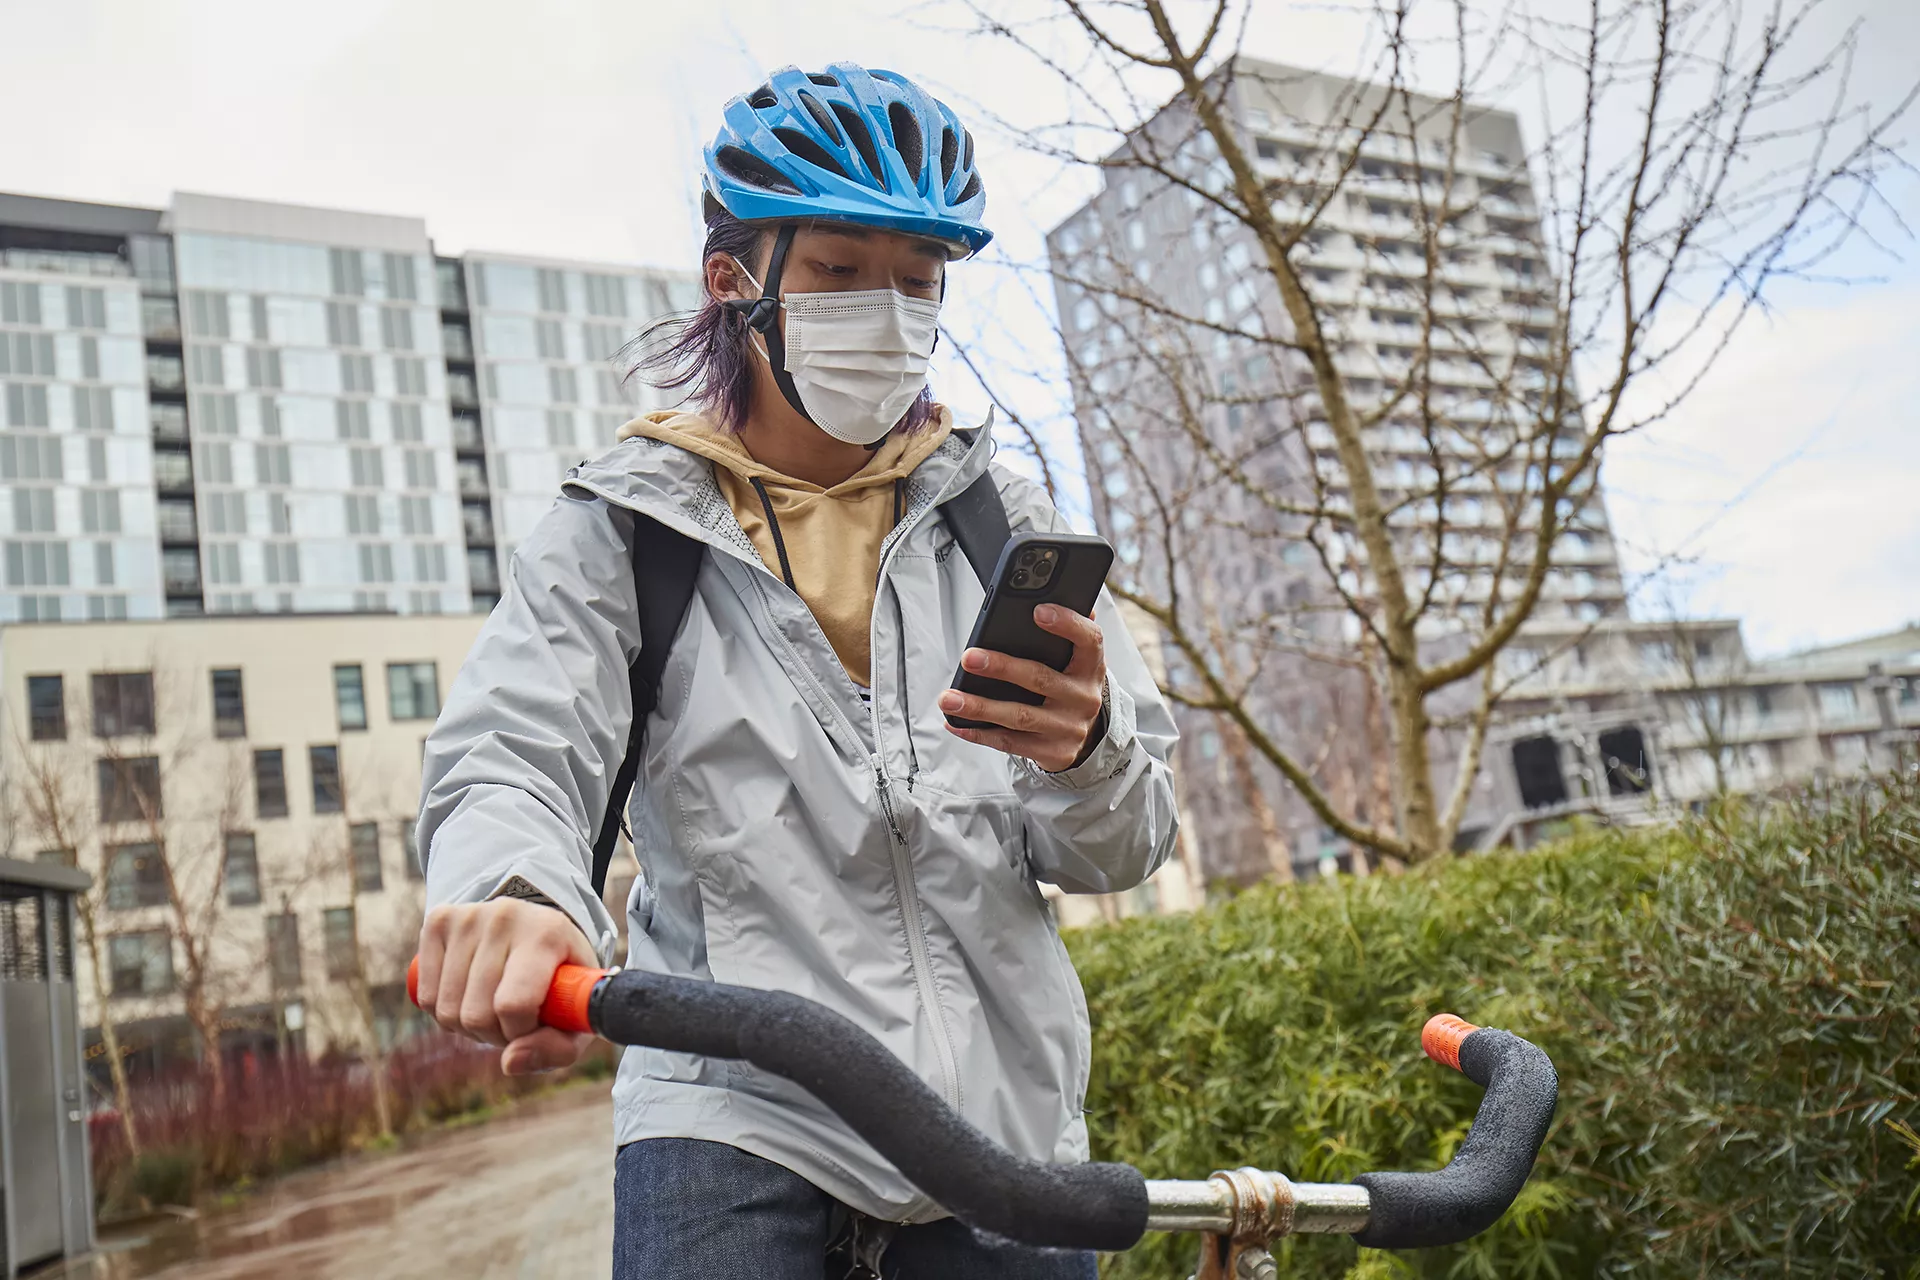 Teen holding bike while looking at phone